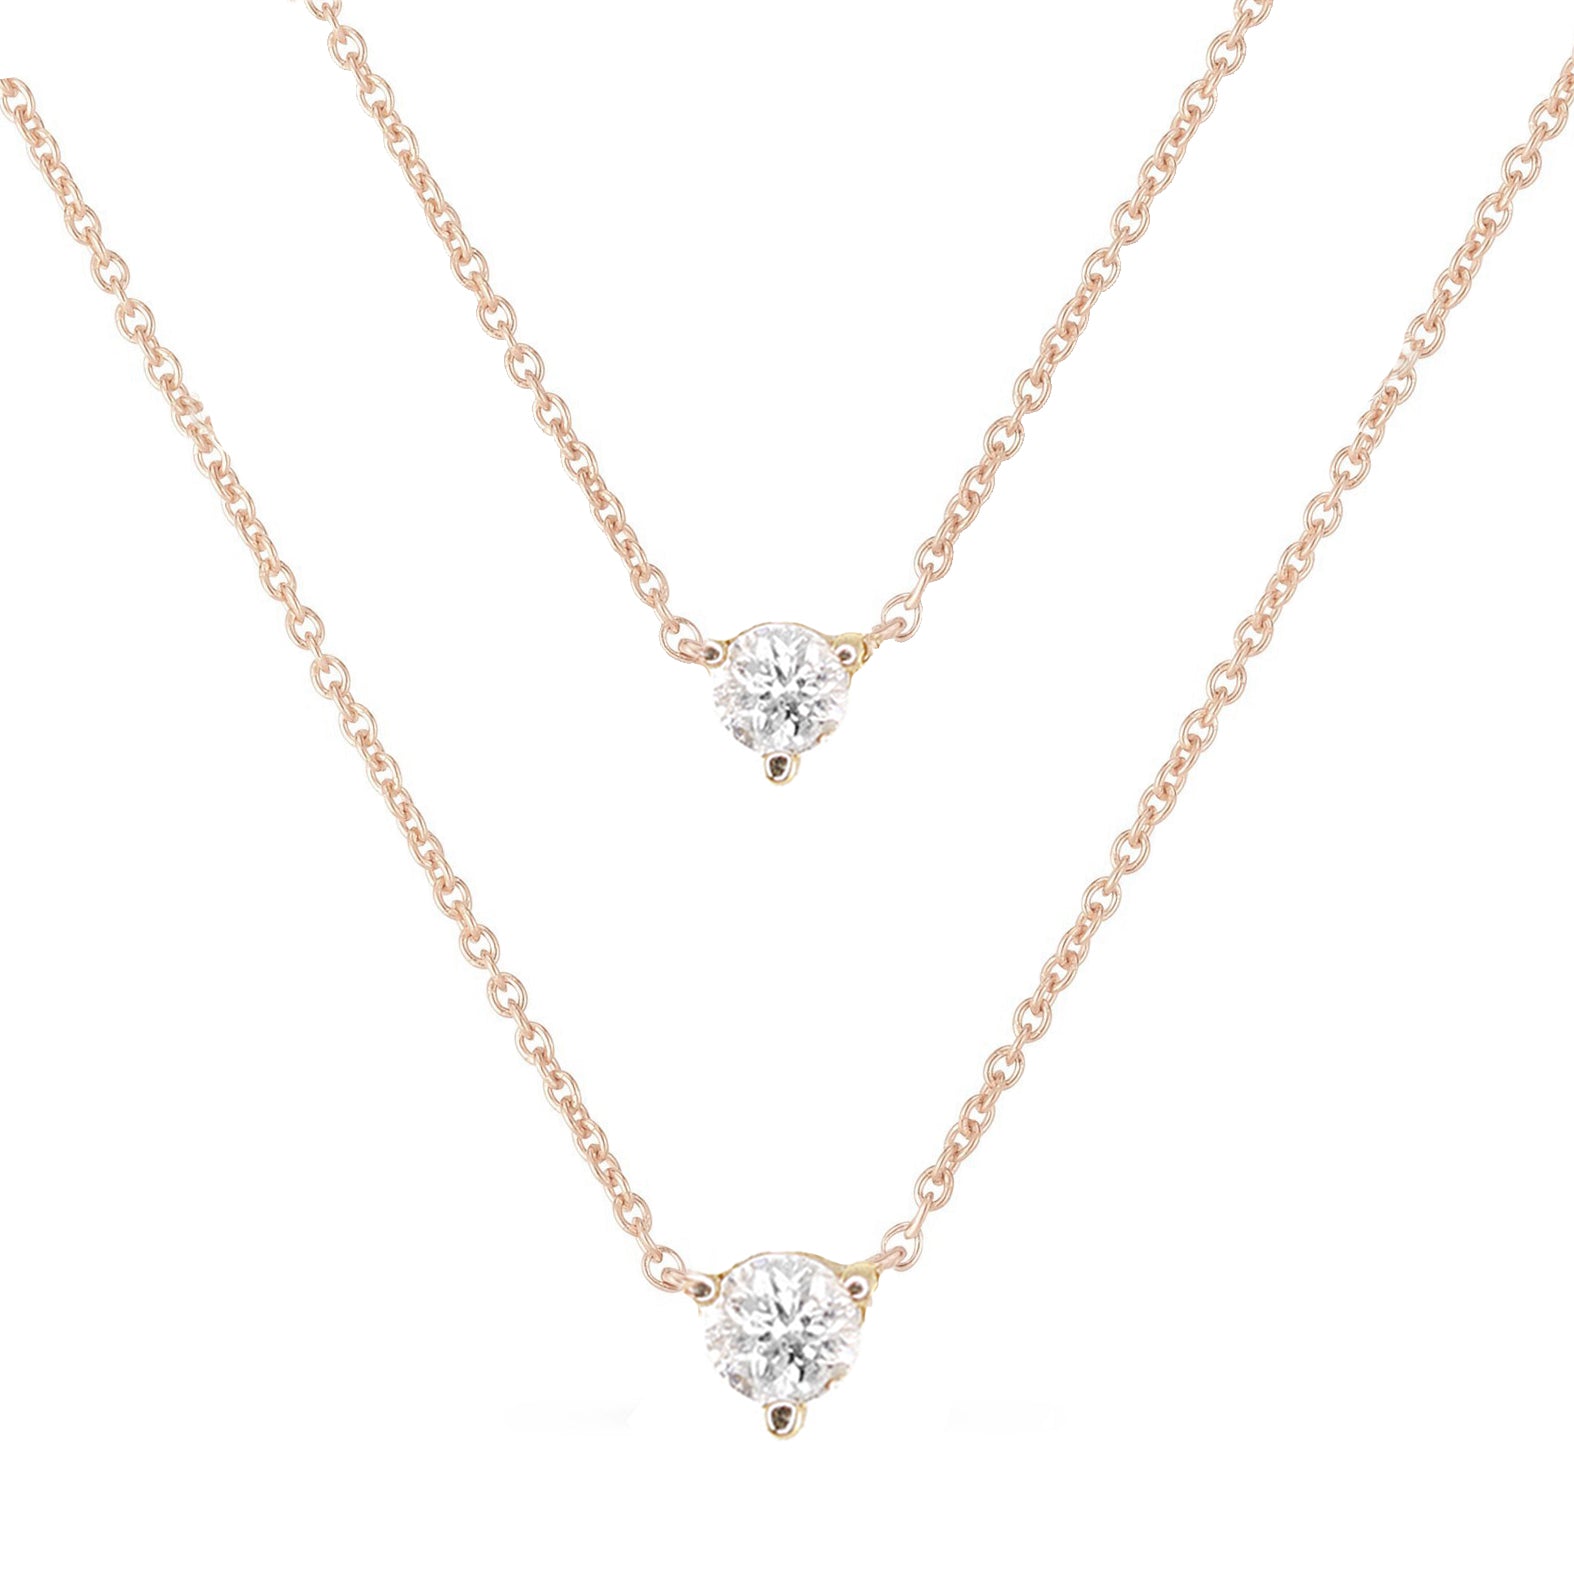 Floating diamond Necklace Gift Pendant In 14K Rose Gold | Fascinating  Diamonds